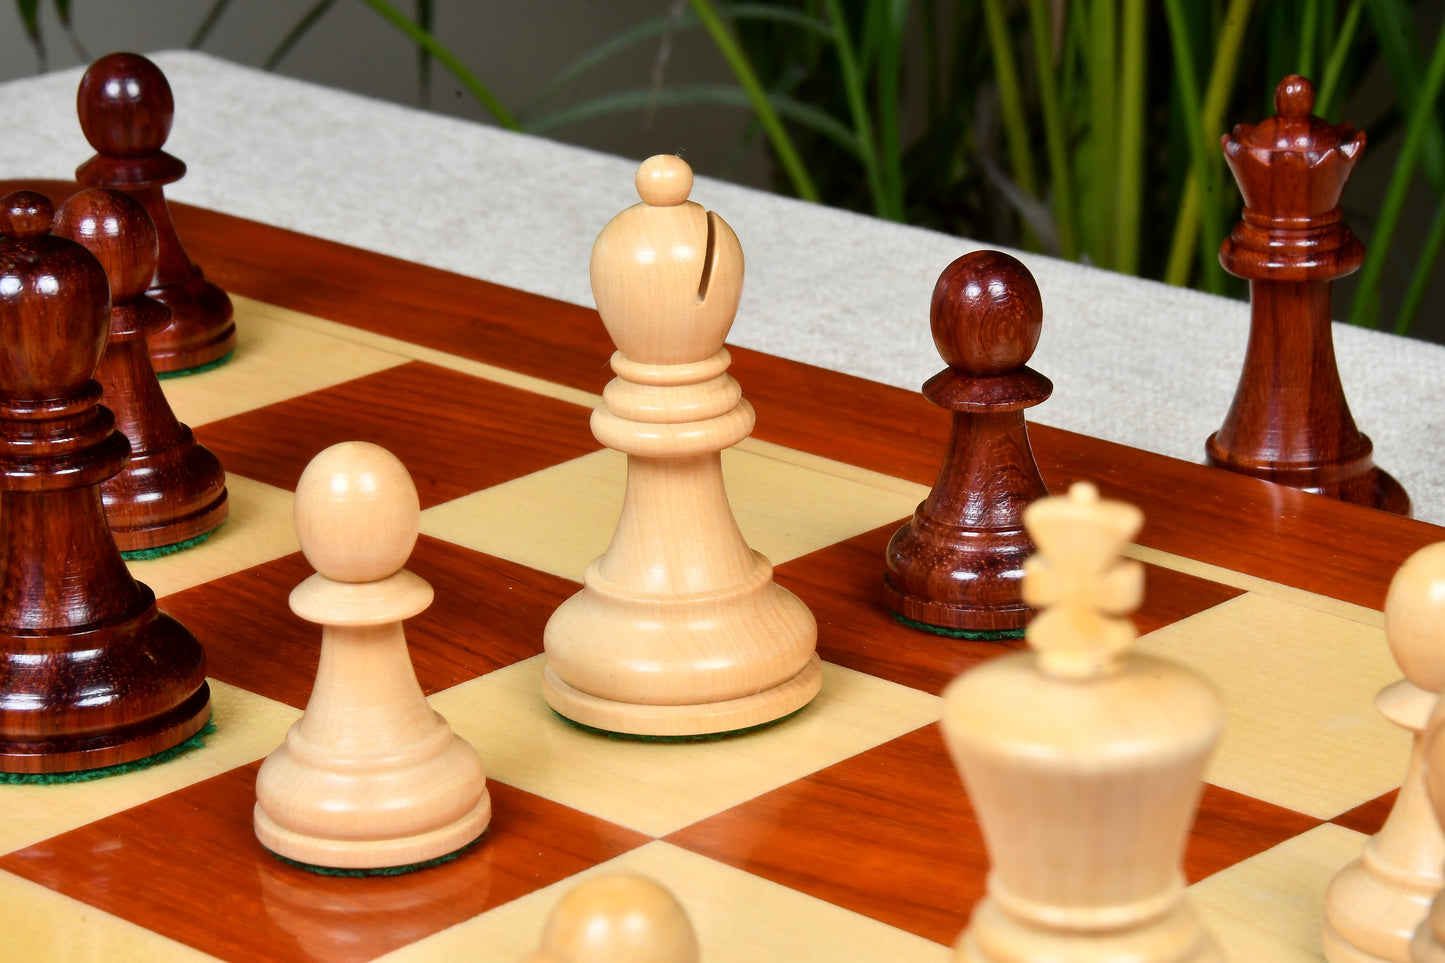 1972 Reproduced Fischer-Spassky Staunton Pattern Chess Pieces V2.0 in Bud Rosewood & Boxwood - 3.75" King